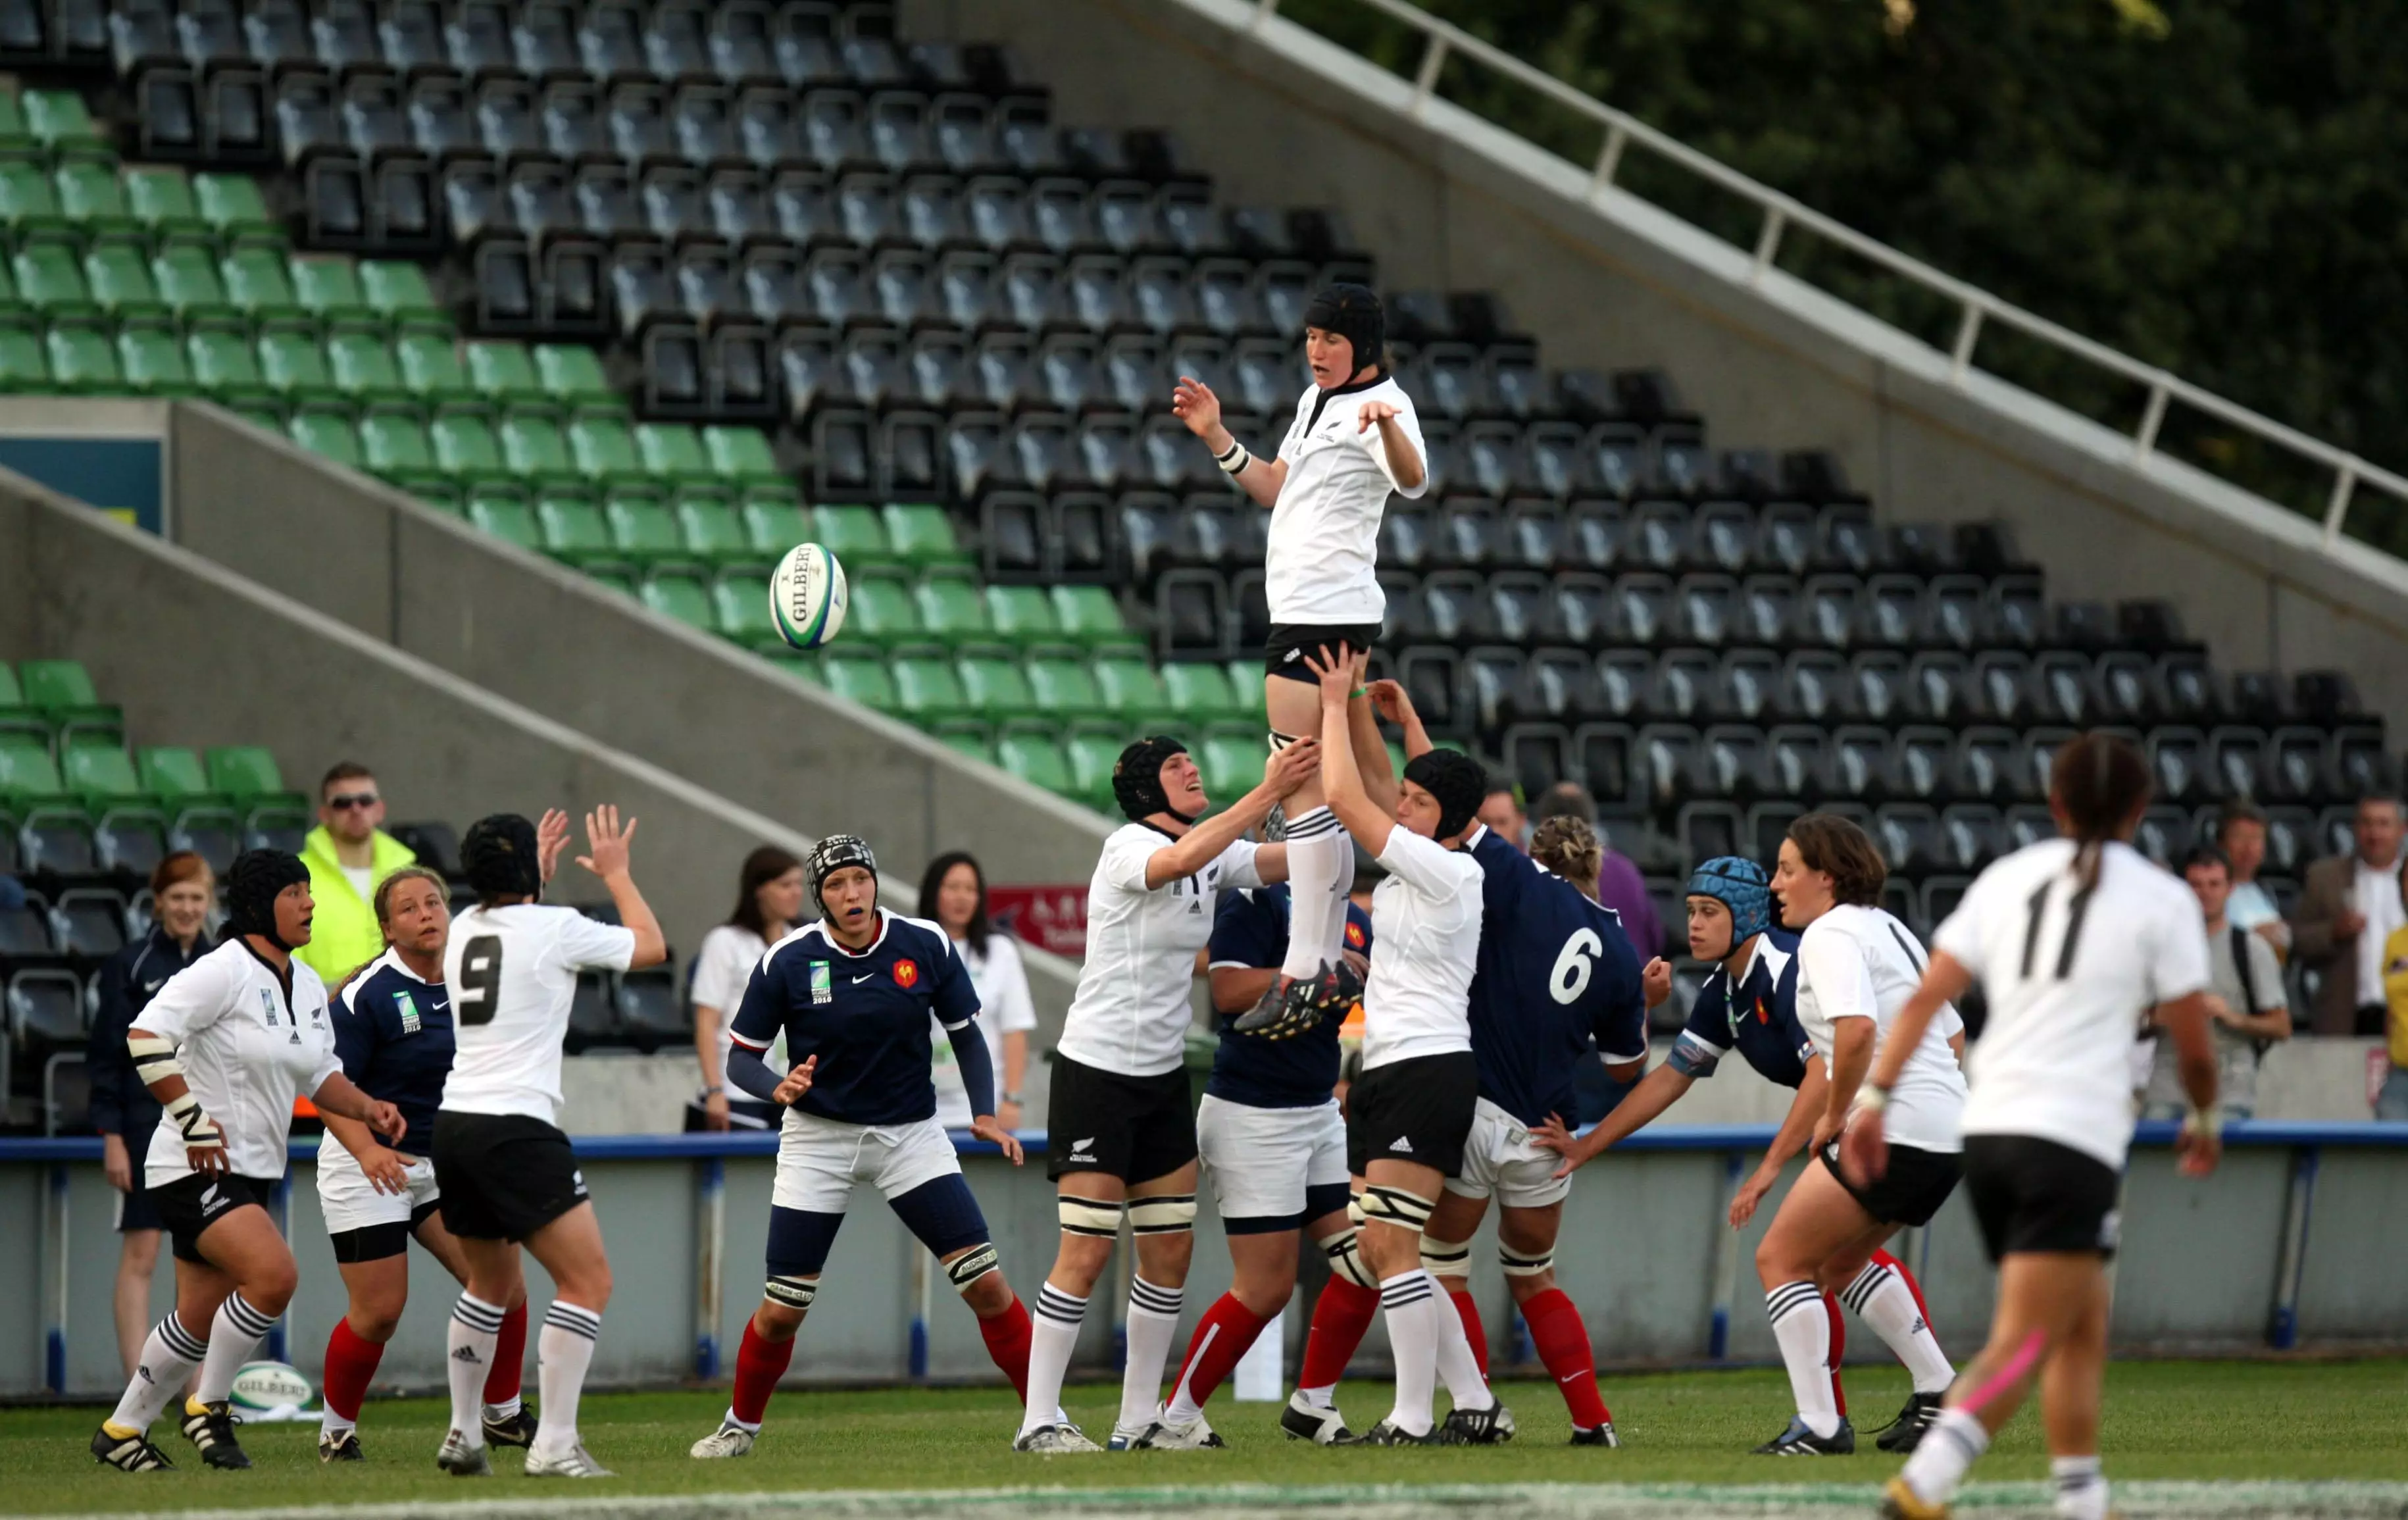 New Zealand win a line out against France in the Women's Rugby World Cup Semi-Final.